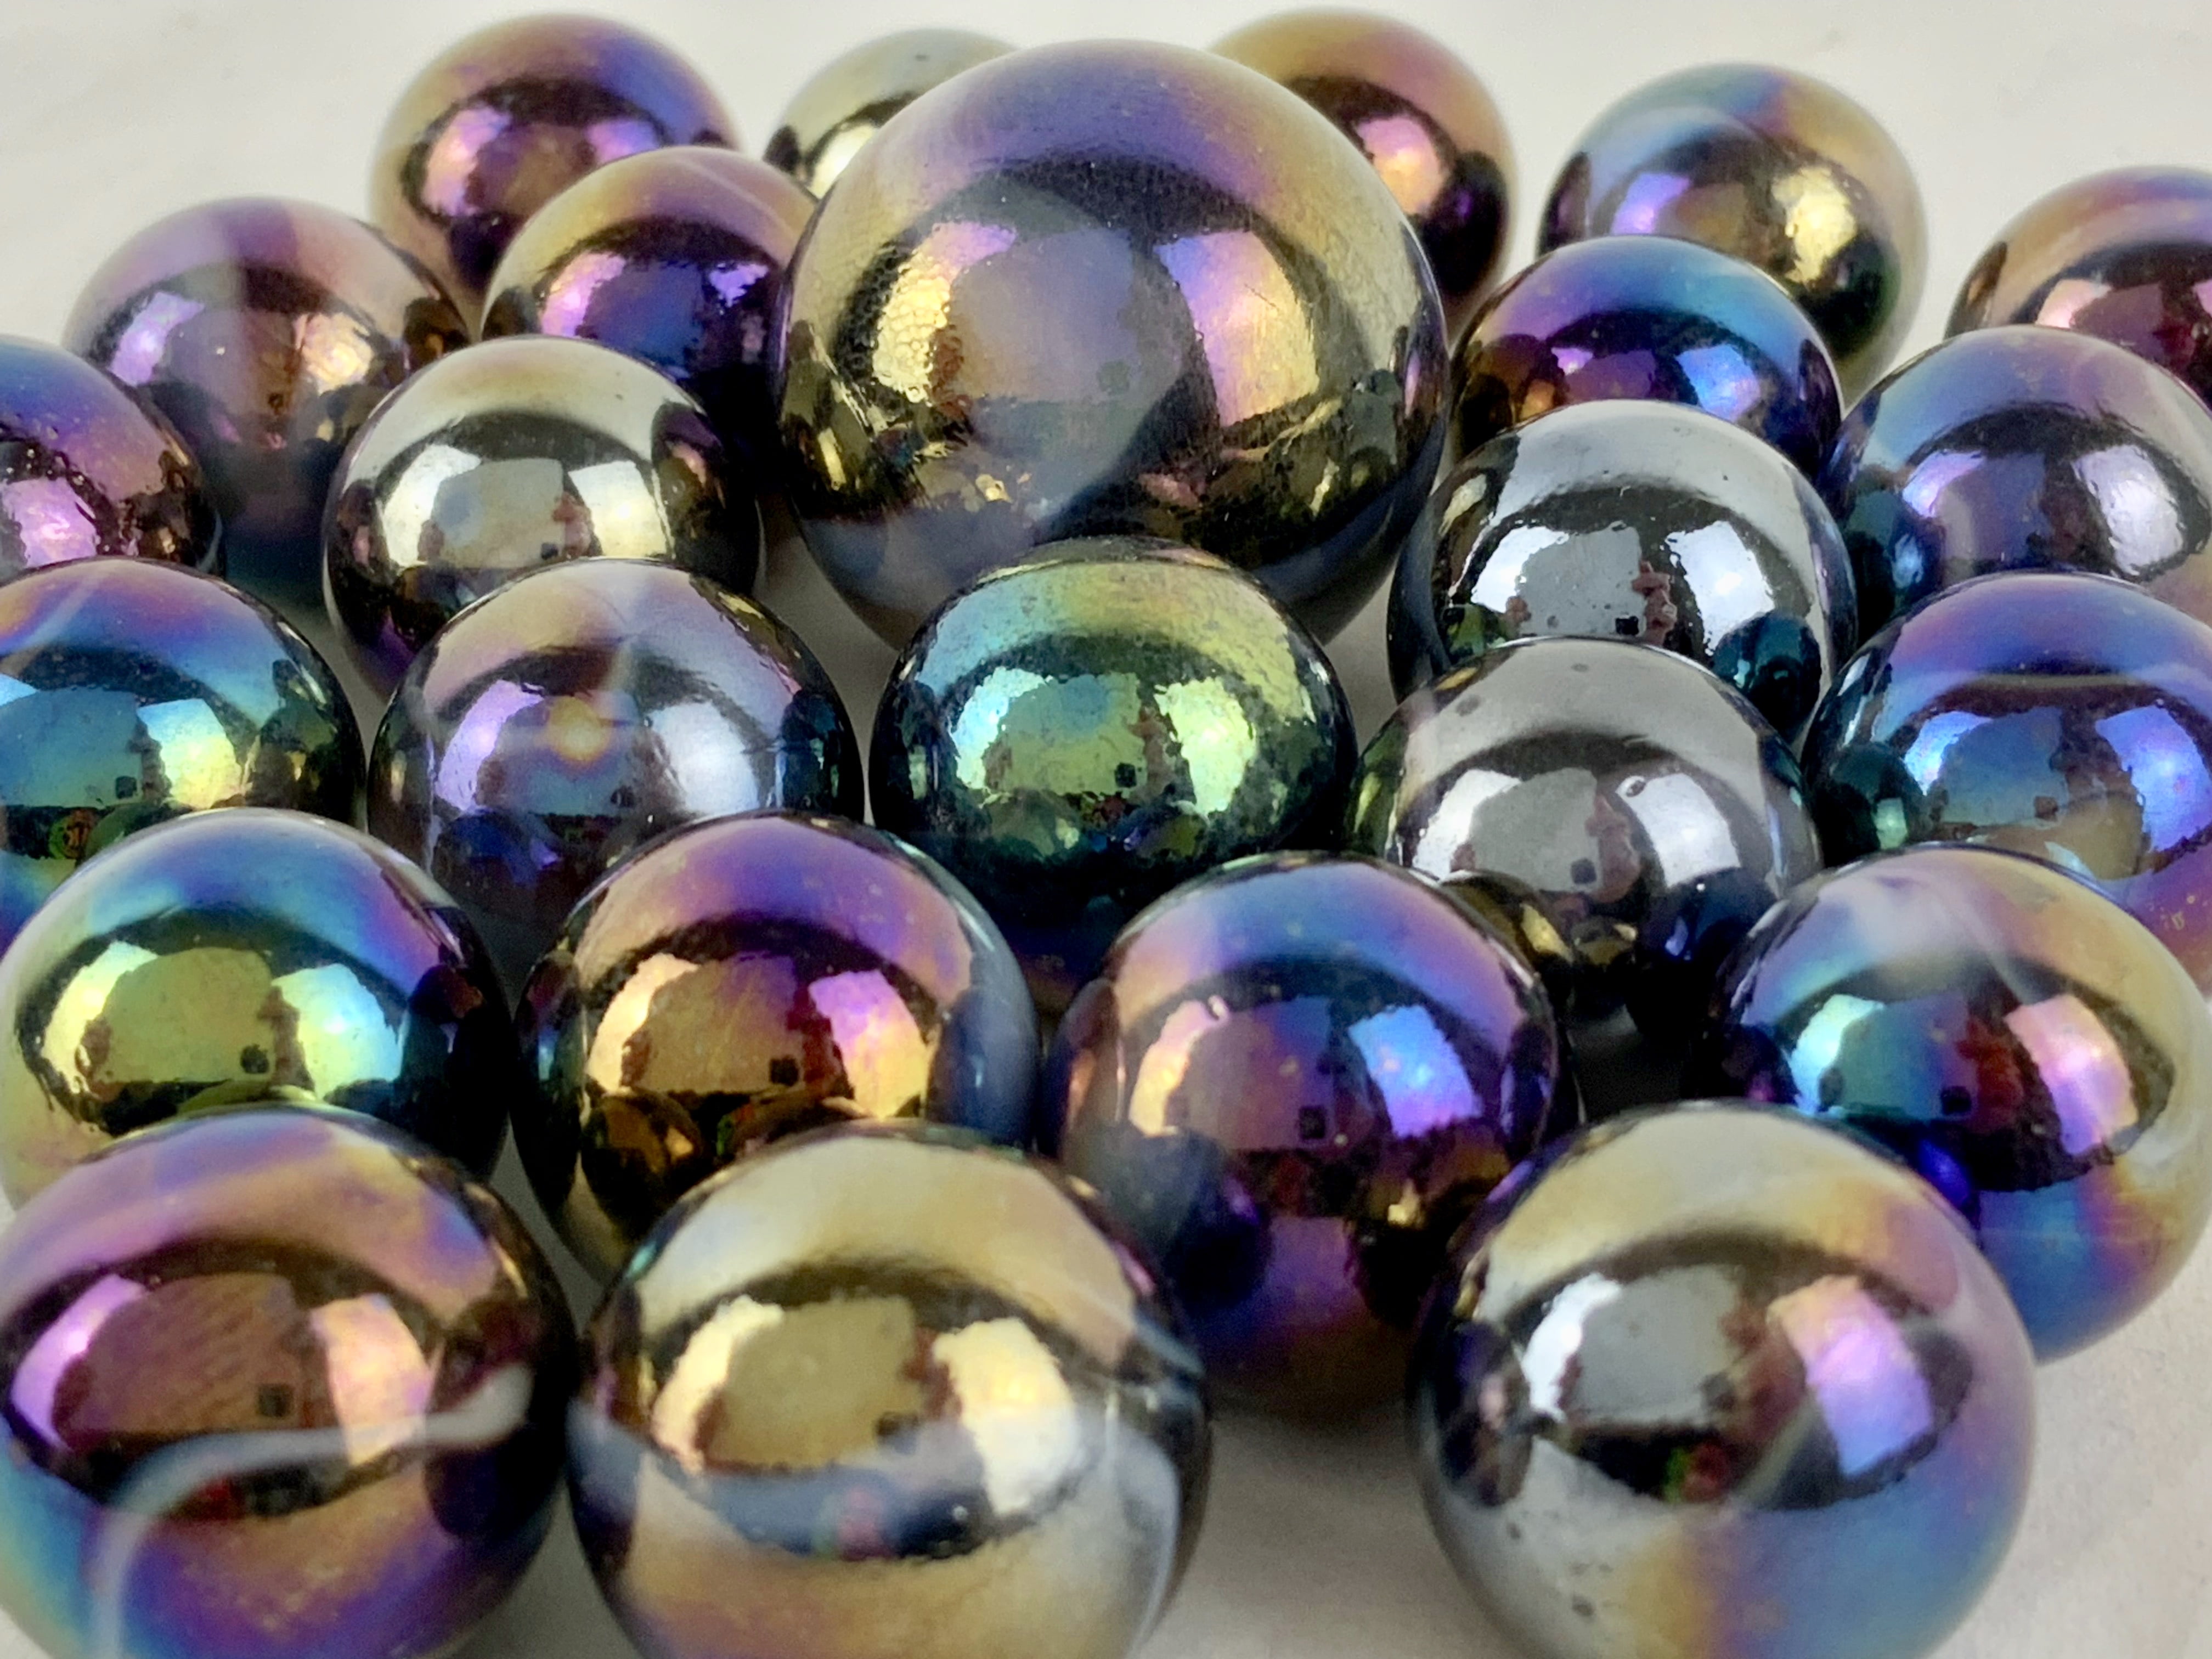 25 Glass Marbles Milky Way Oil Slick Metallic Toy Game Pack (24 Player, 1 Shooter)